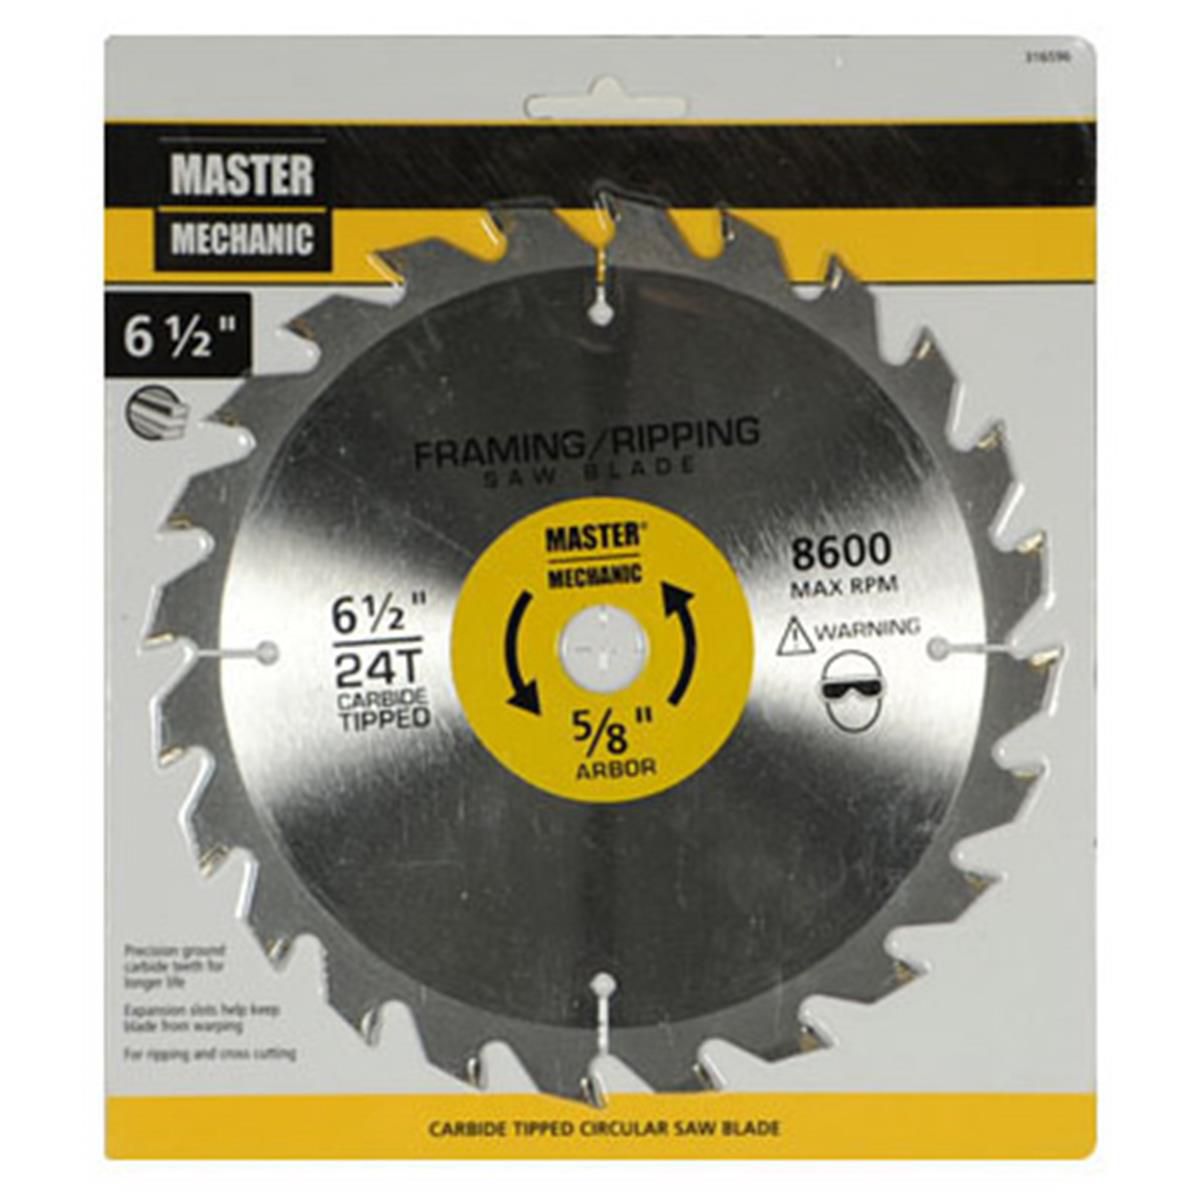 Image for Disston 316596 6.5 in. Master Mechanic Framing Combination & Rip Circular Saw Blade, 24 Tooth at Kohl's.